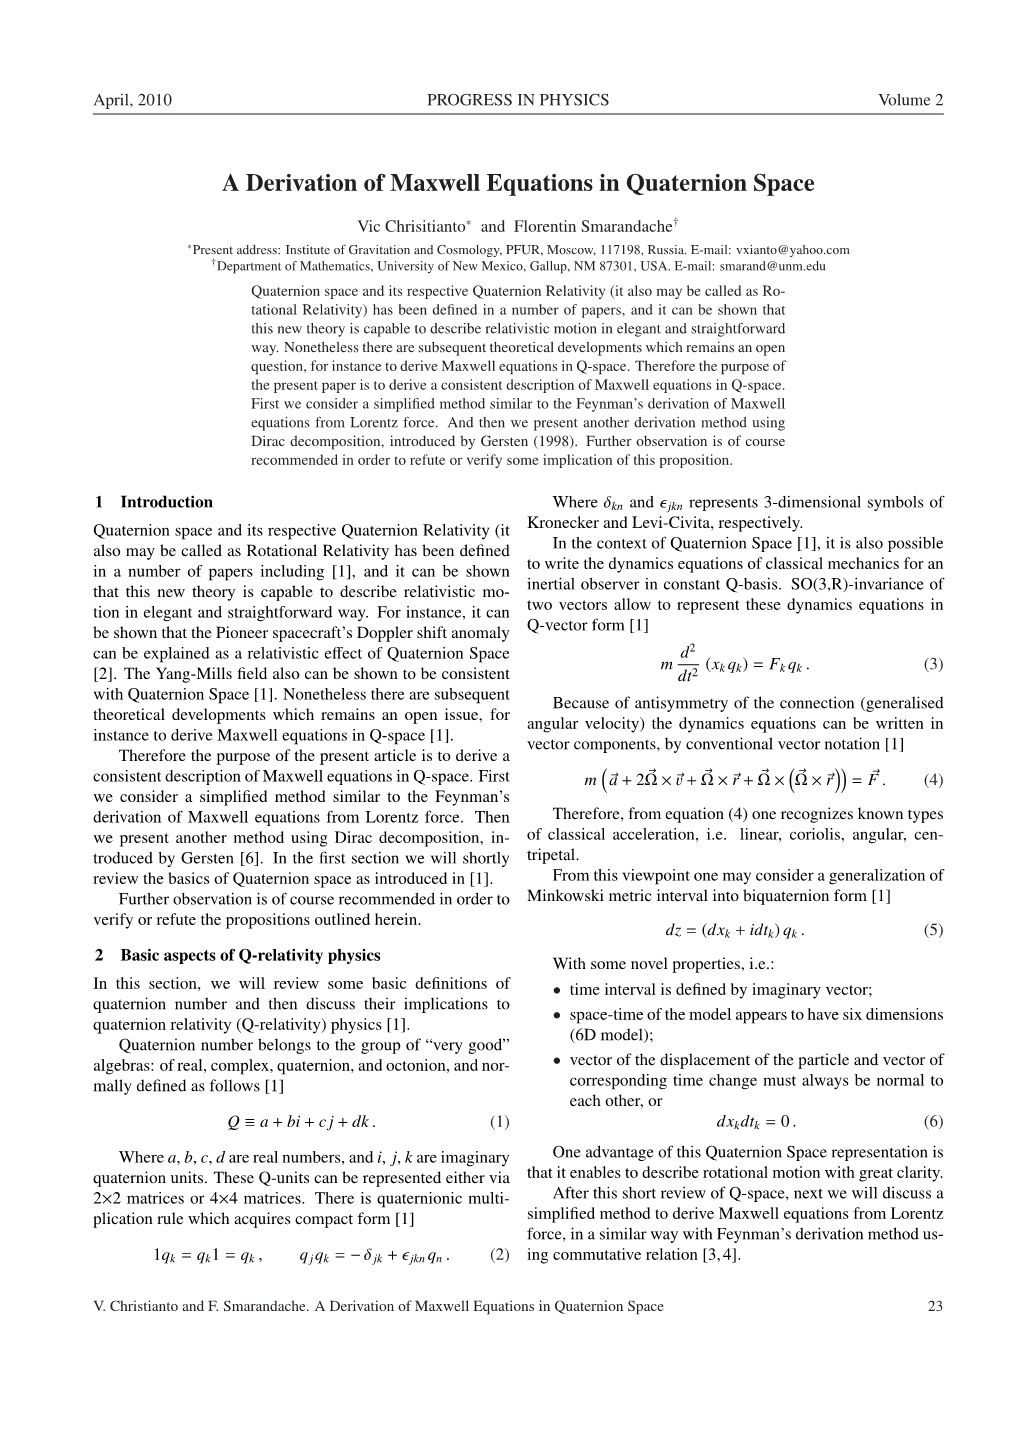 A Derivation of Maxwell Equations in Quaternion Space